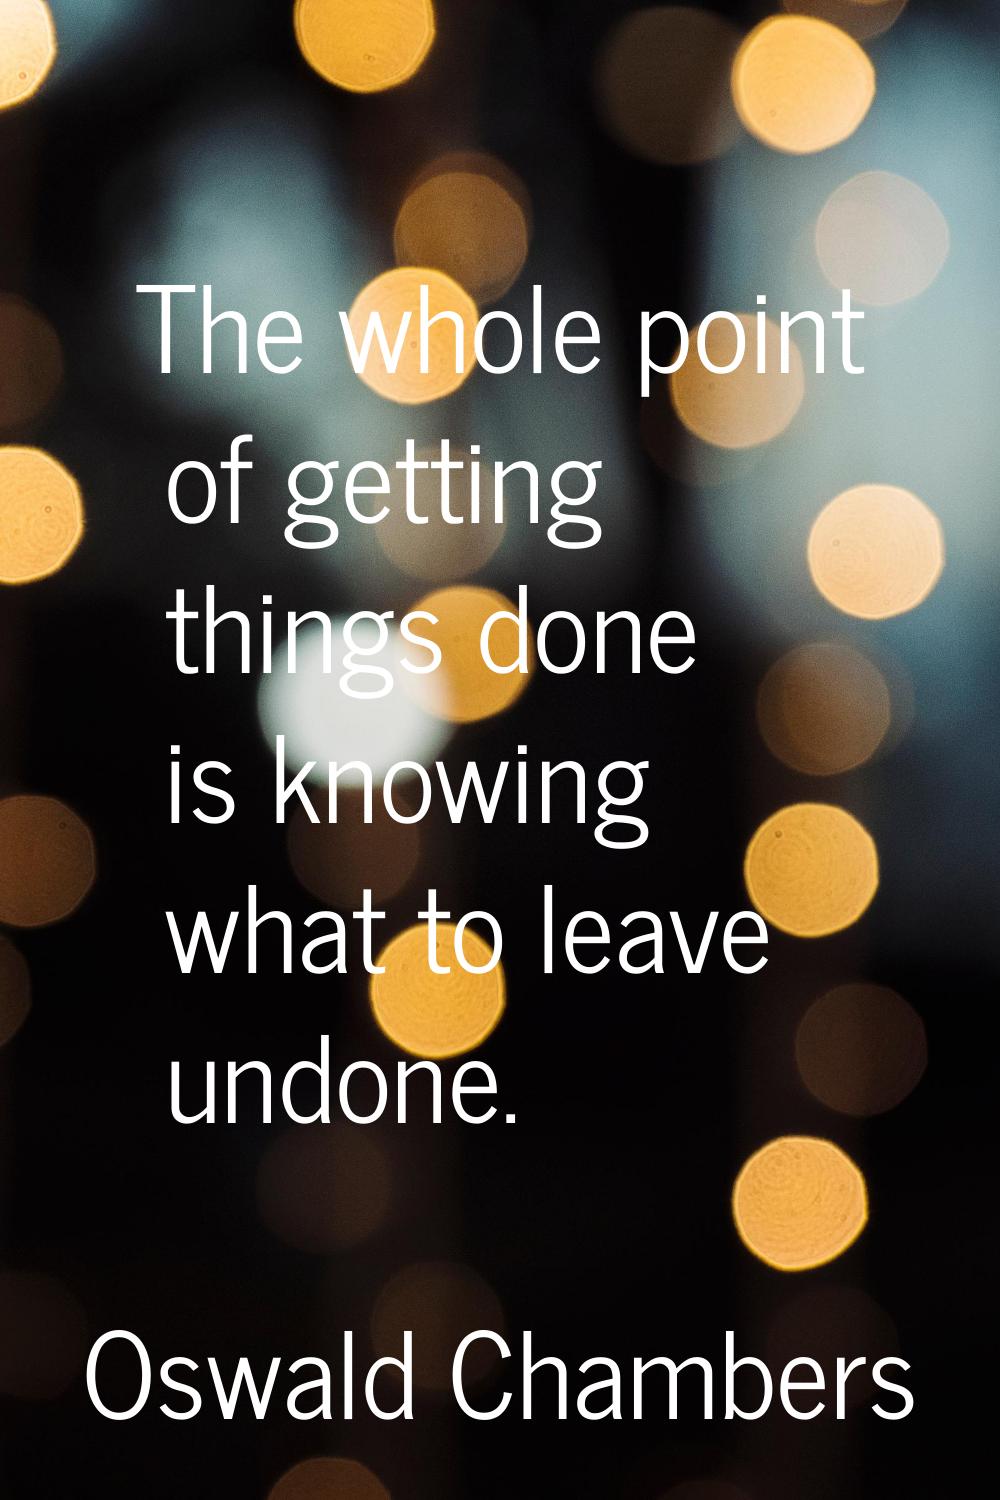 The whole point of getting things done is knowing what to leave undone.